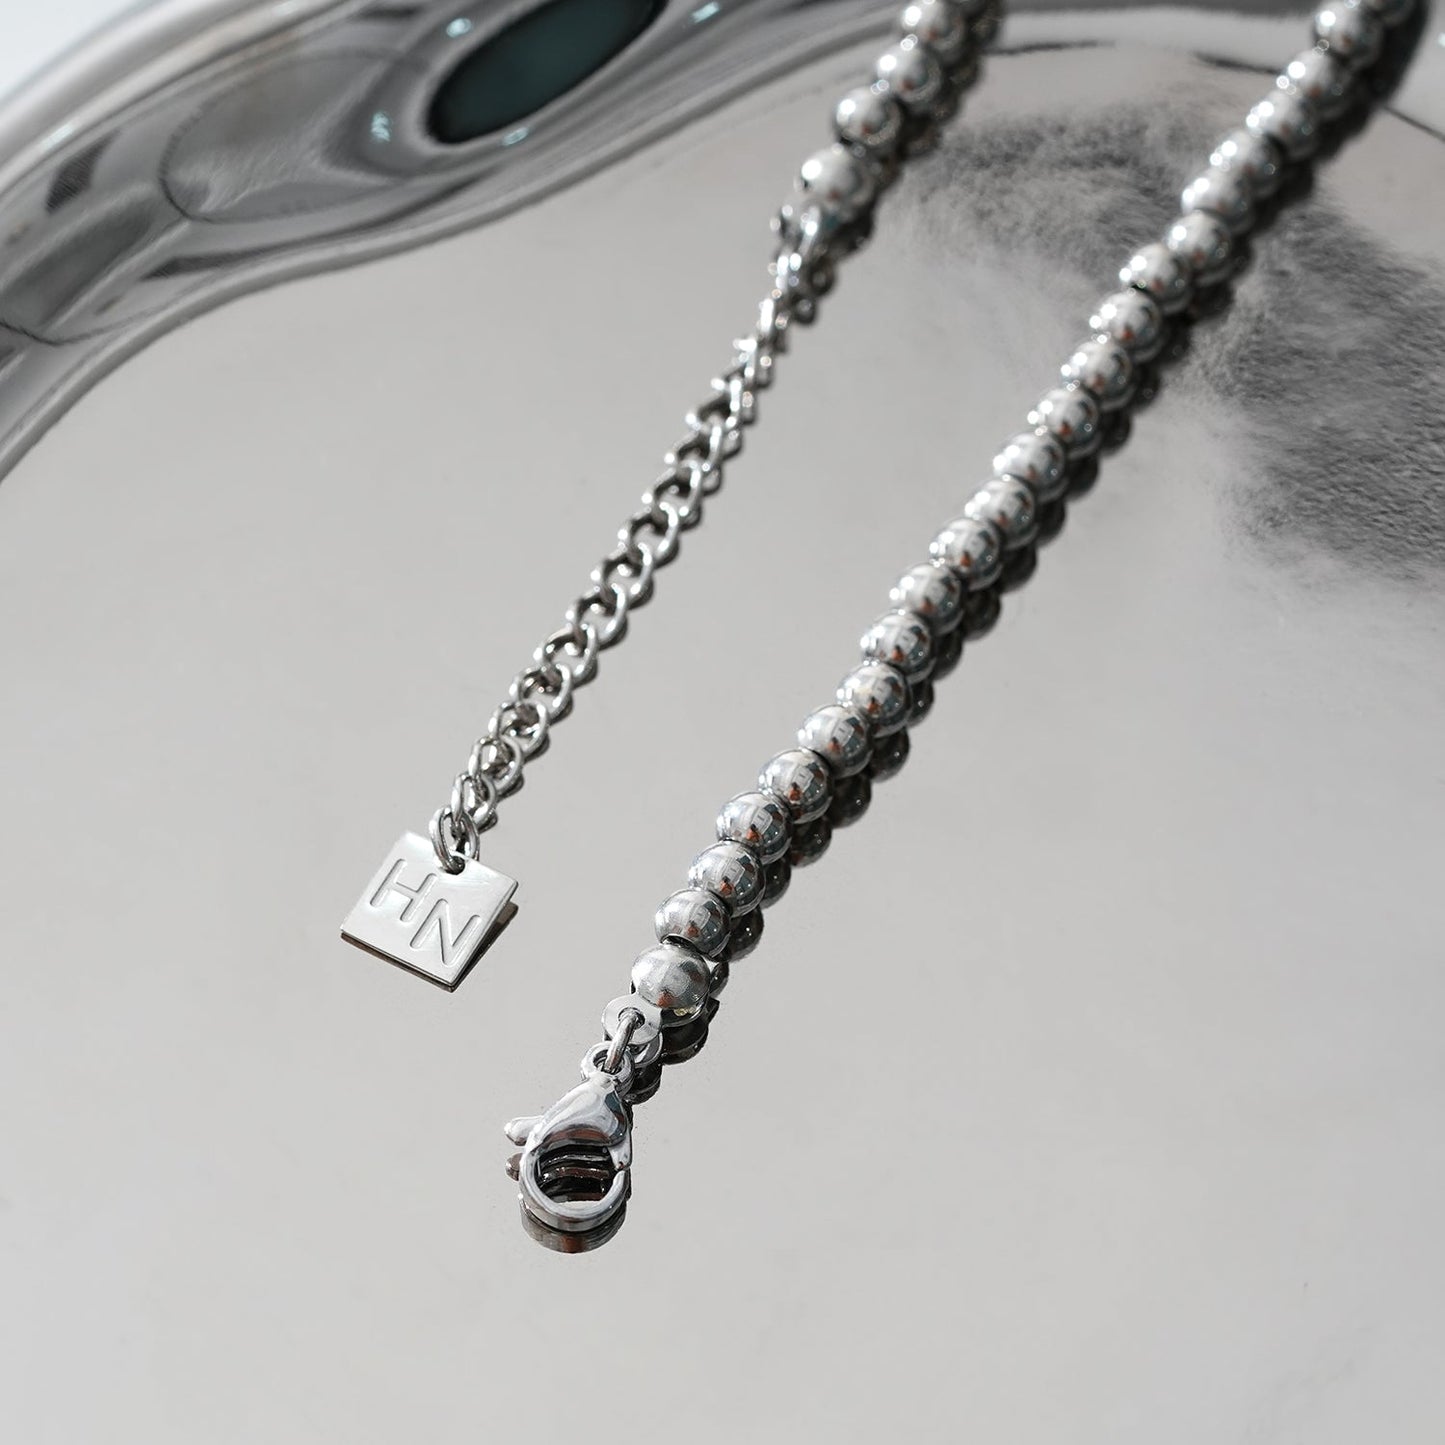 MANAMI LG: Ball-Beads Contemporary Chain Silver Anklet